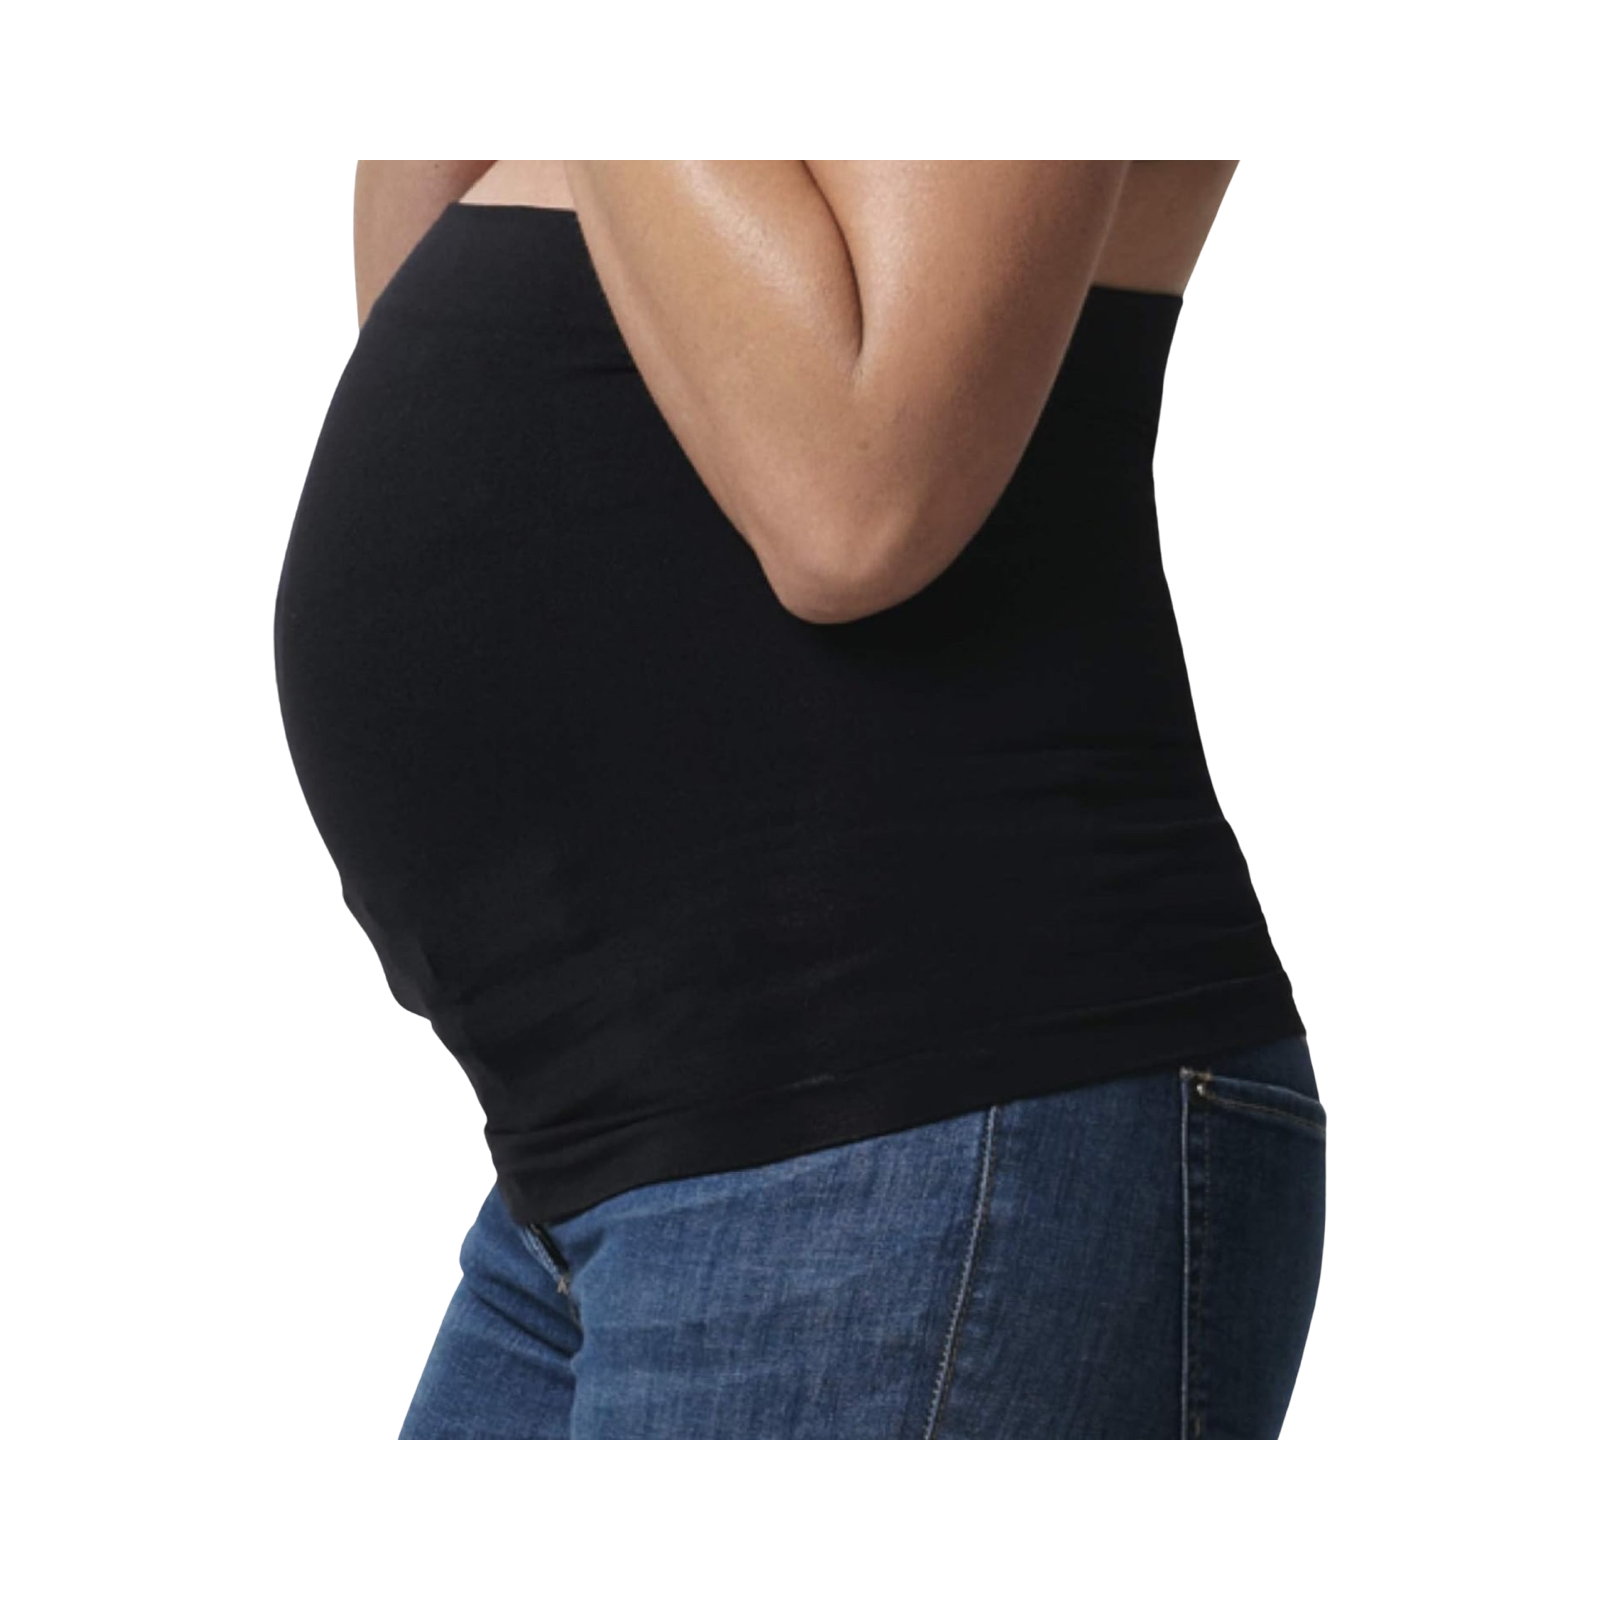 Maternity or Pregnancy Belly Band Uses